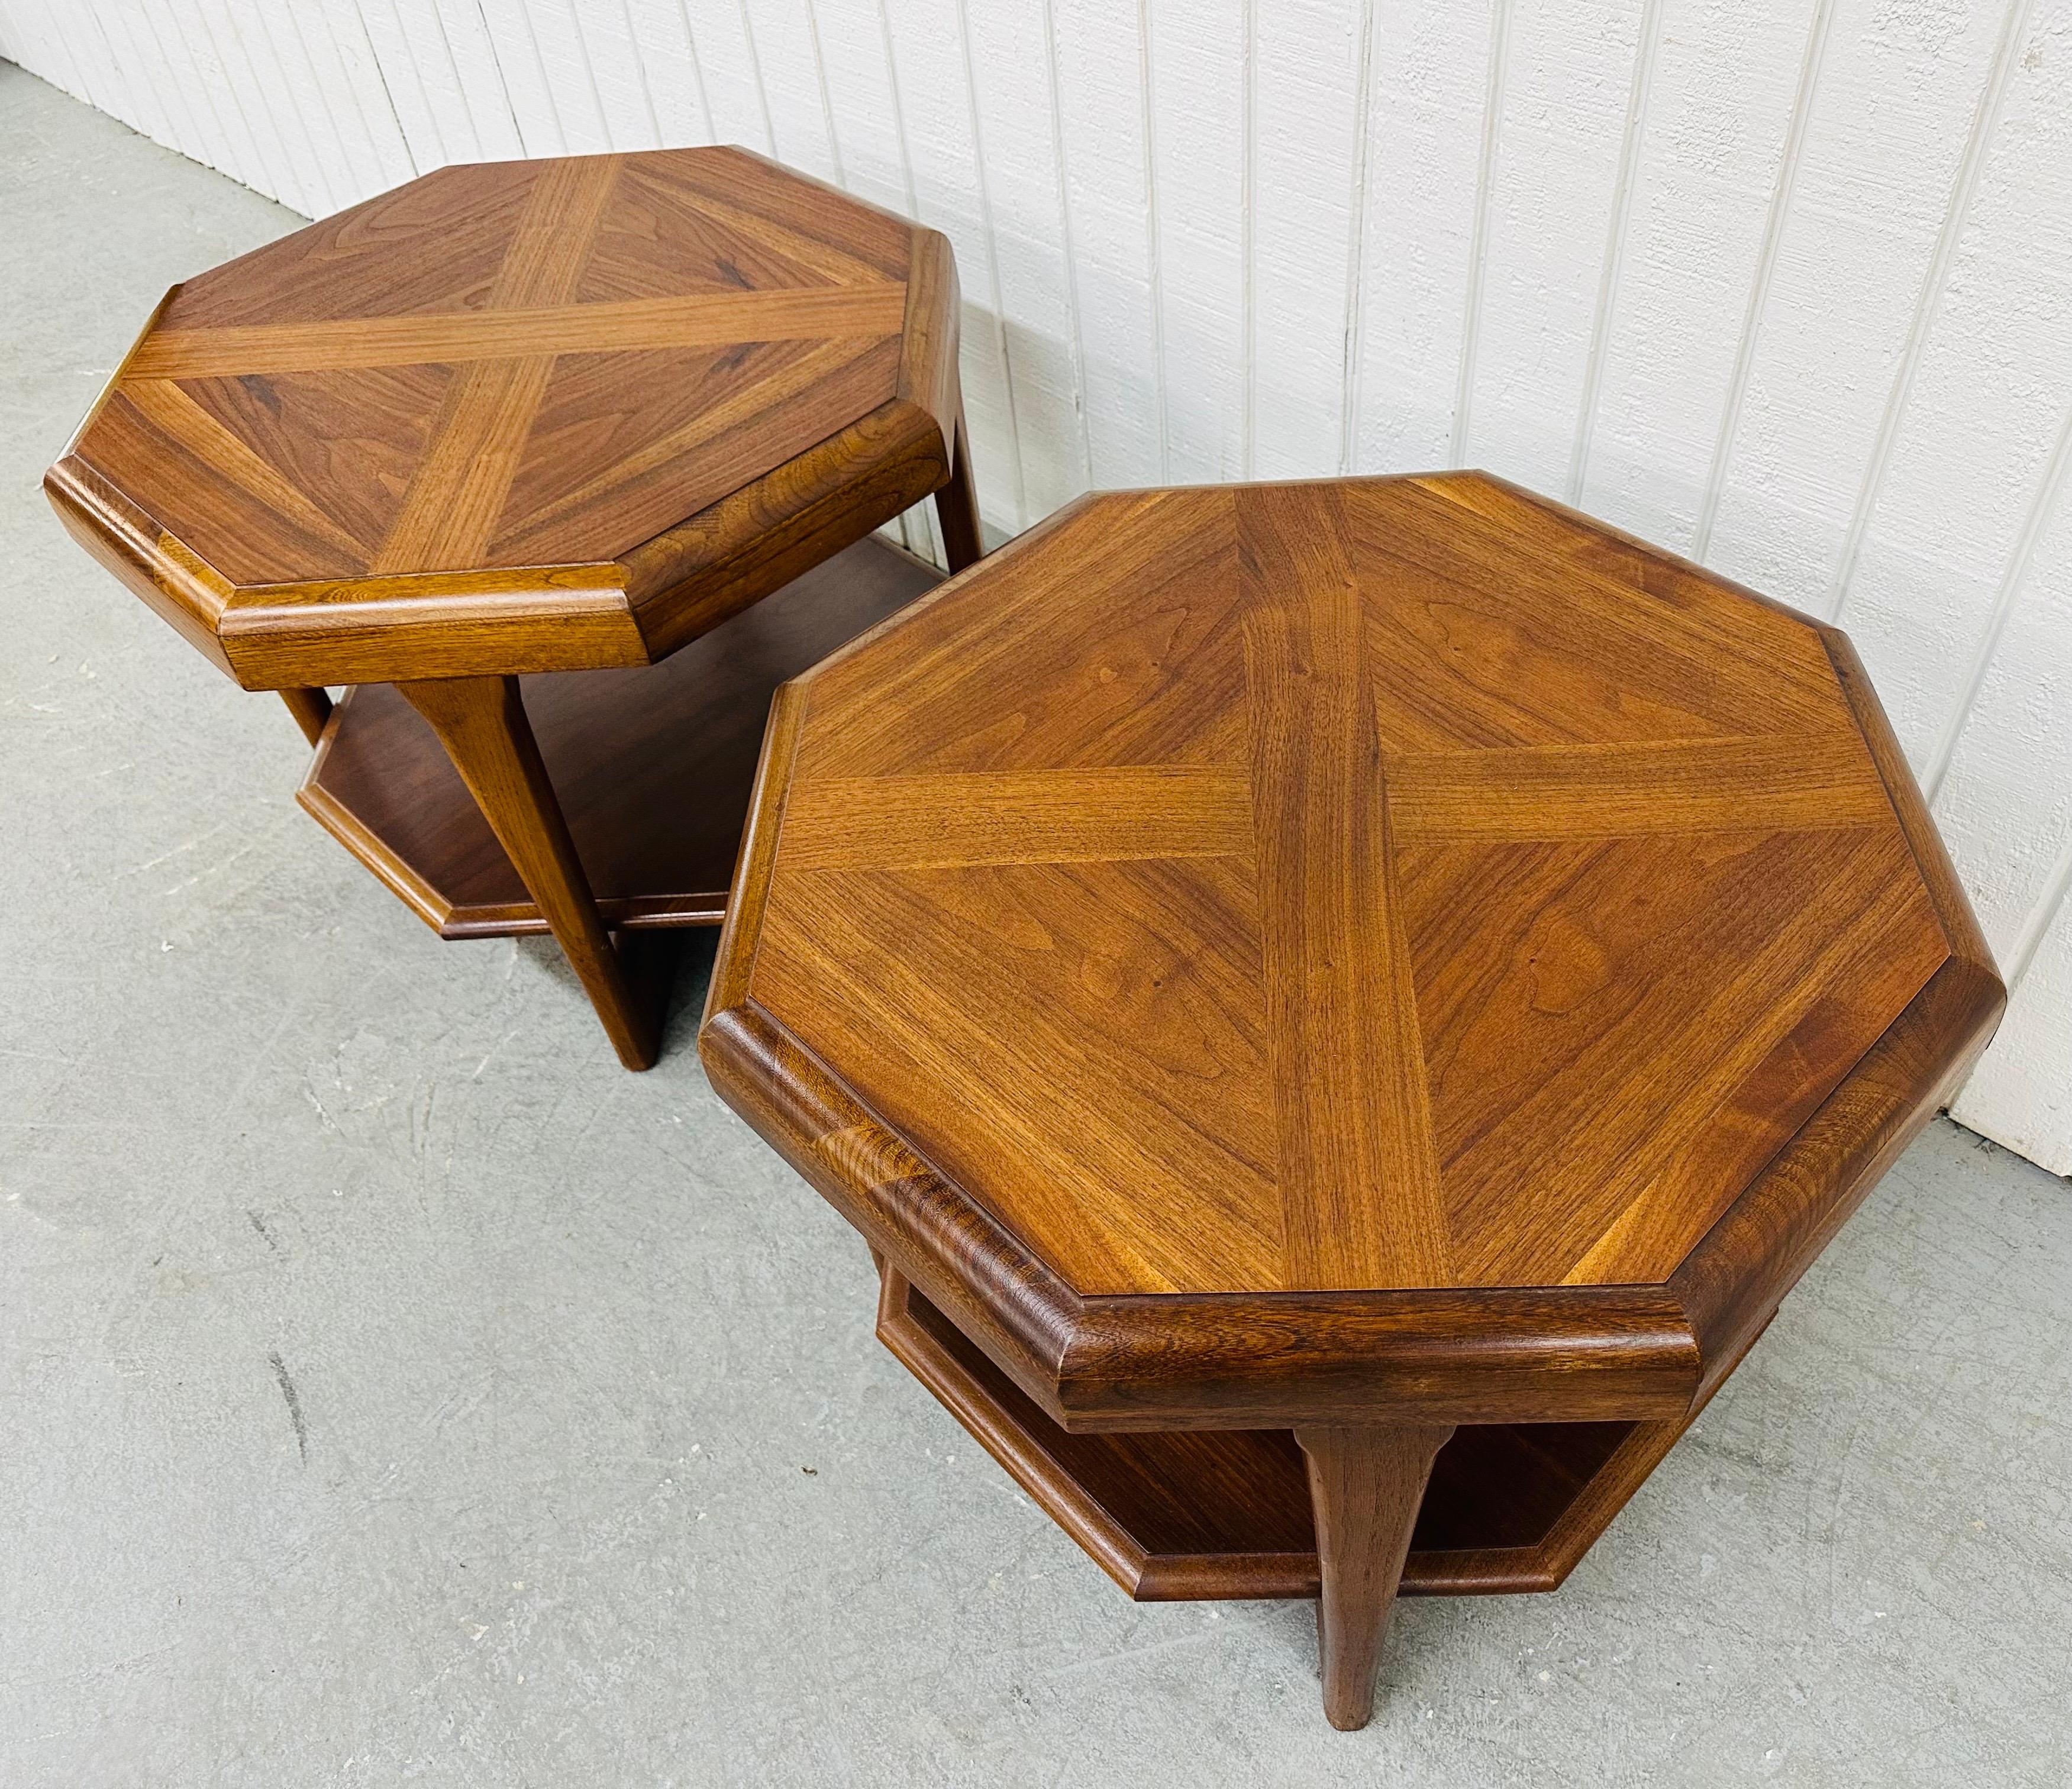 This listing is for a pair of Mid-Century Modern Lane Octagonal Walnut Side Tables. Featuring a two-tier octagonal design, modern legs, and a beautiful walnut finish. This is an exceptional combination of quality and design by Lane!